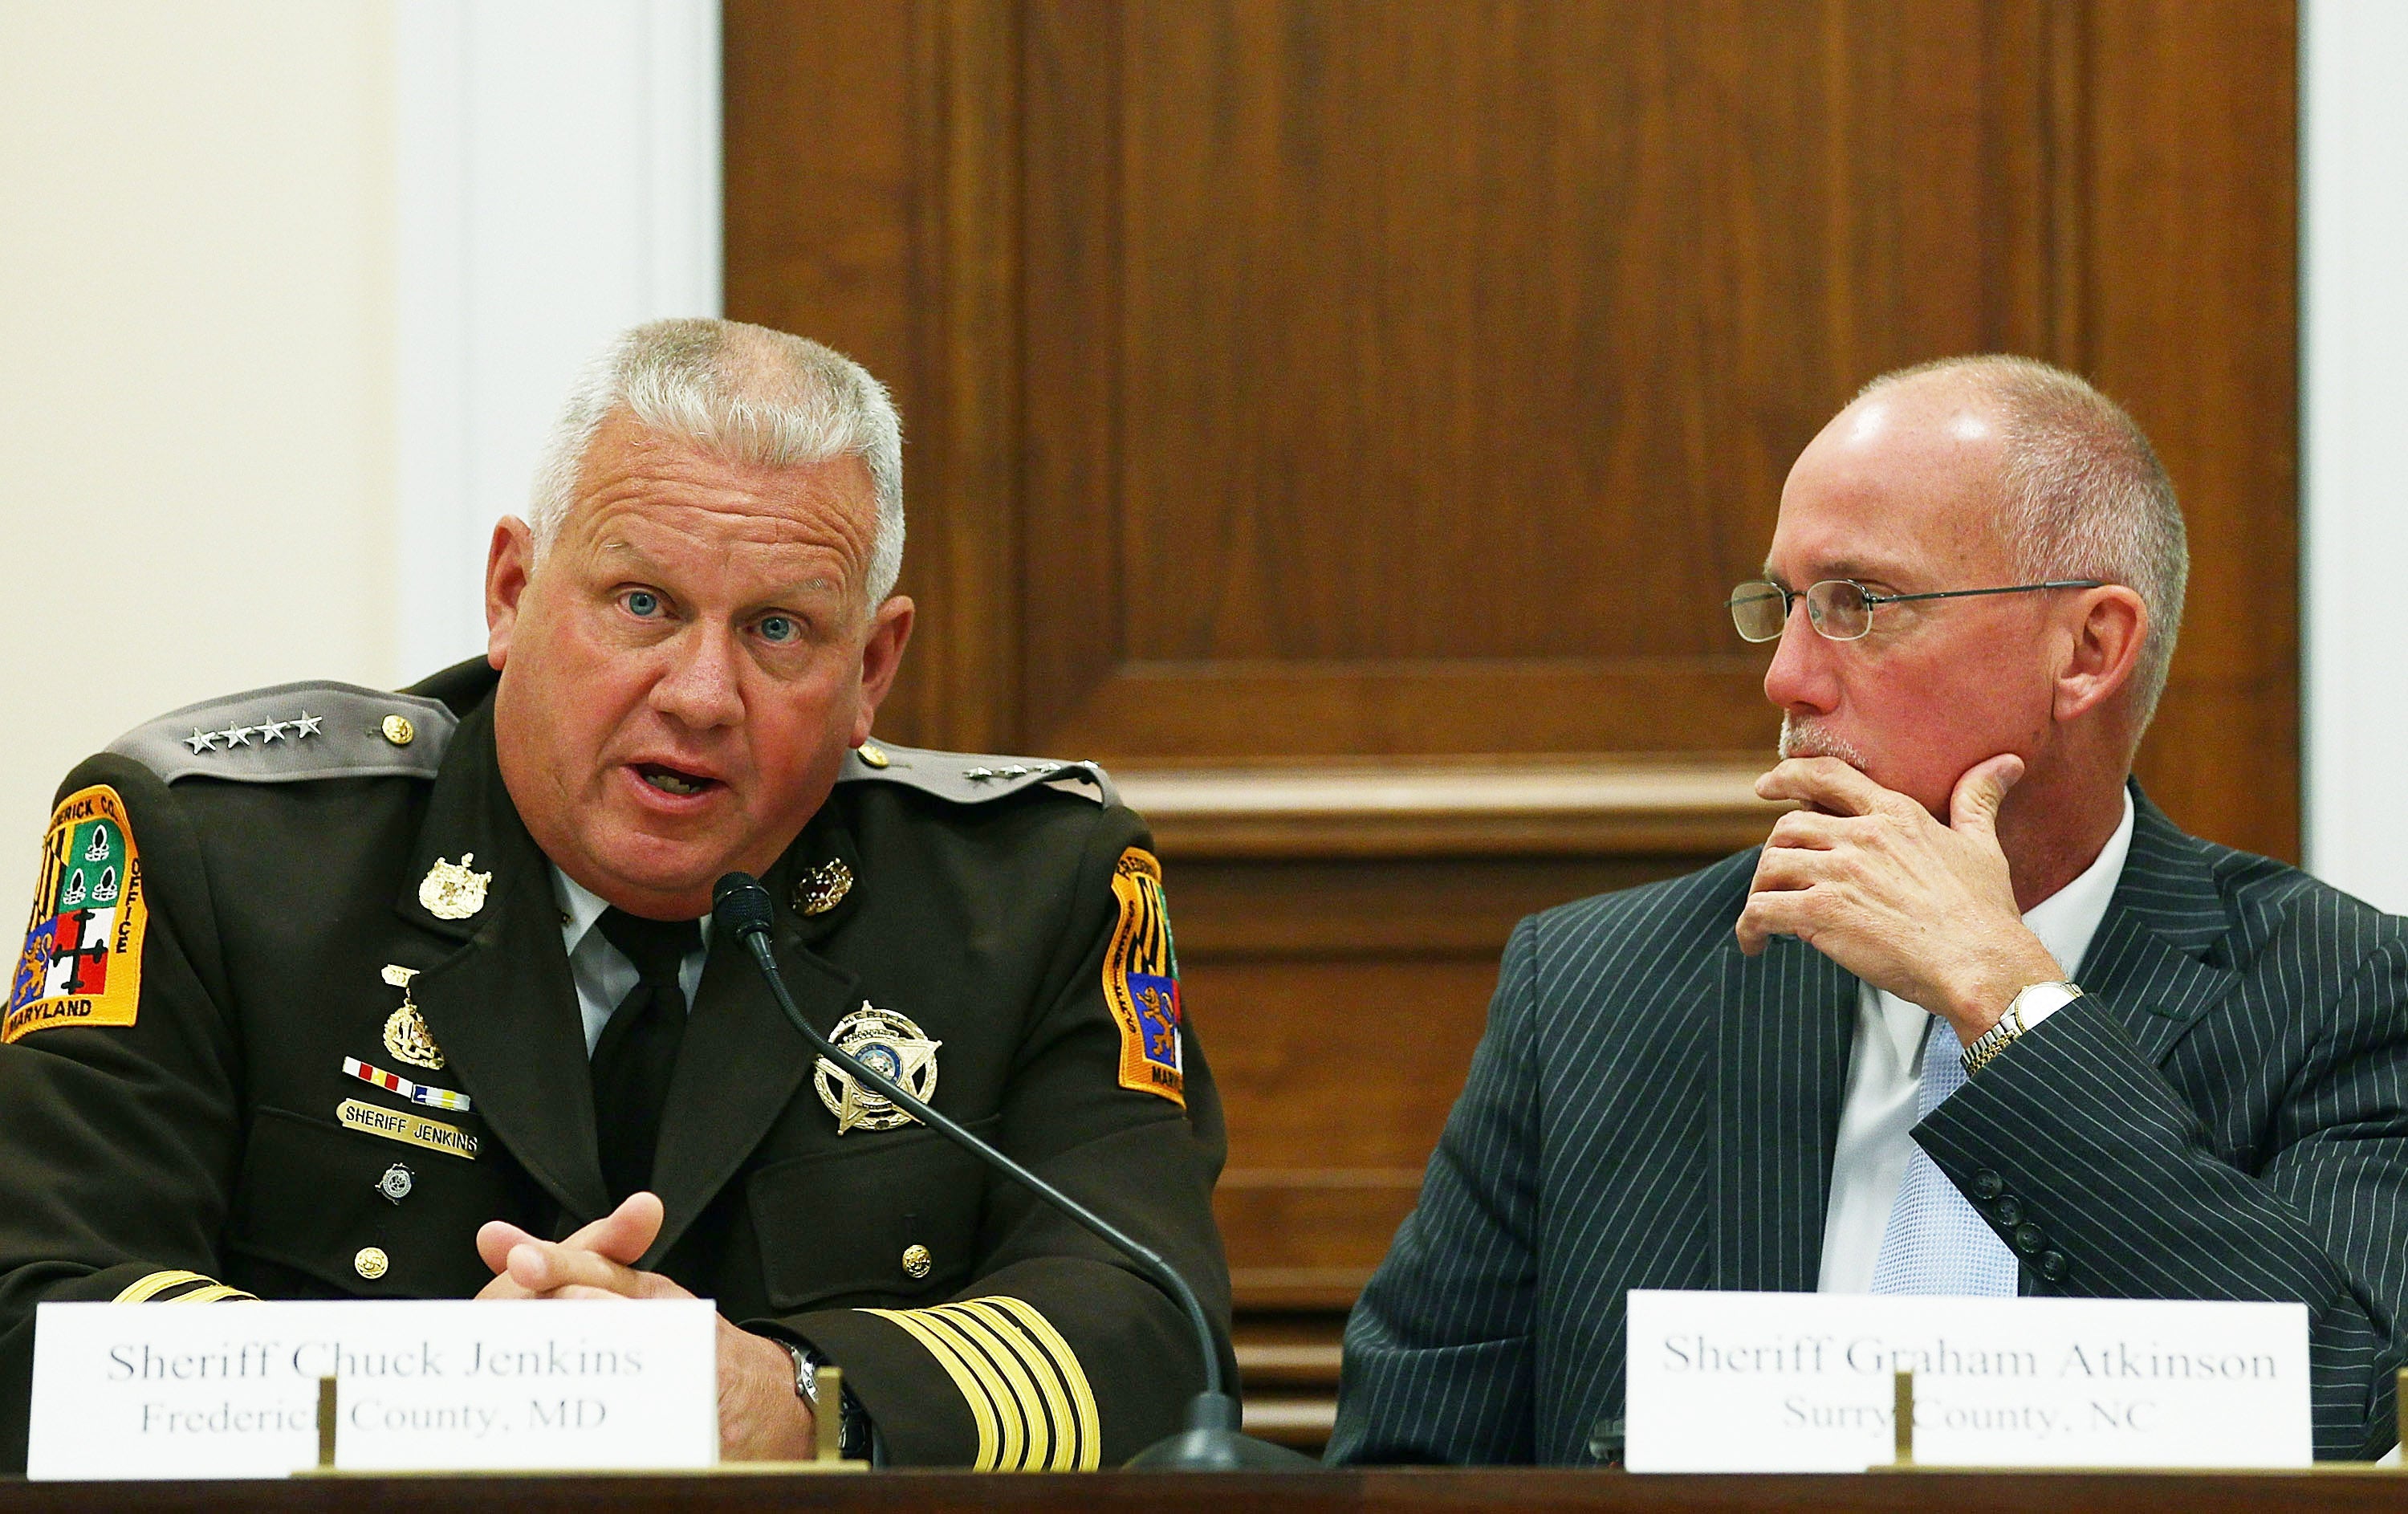 Sheriff Chuck Jenkins left, of Frederick County, Maryland., and Sheriff Graham Atkinson, of Surry County, North Carolina, participate in a discussion on immigration October 12, 2011